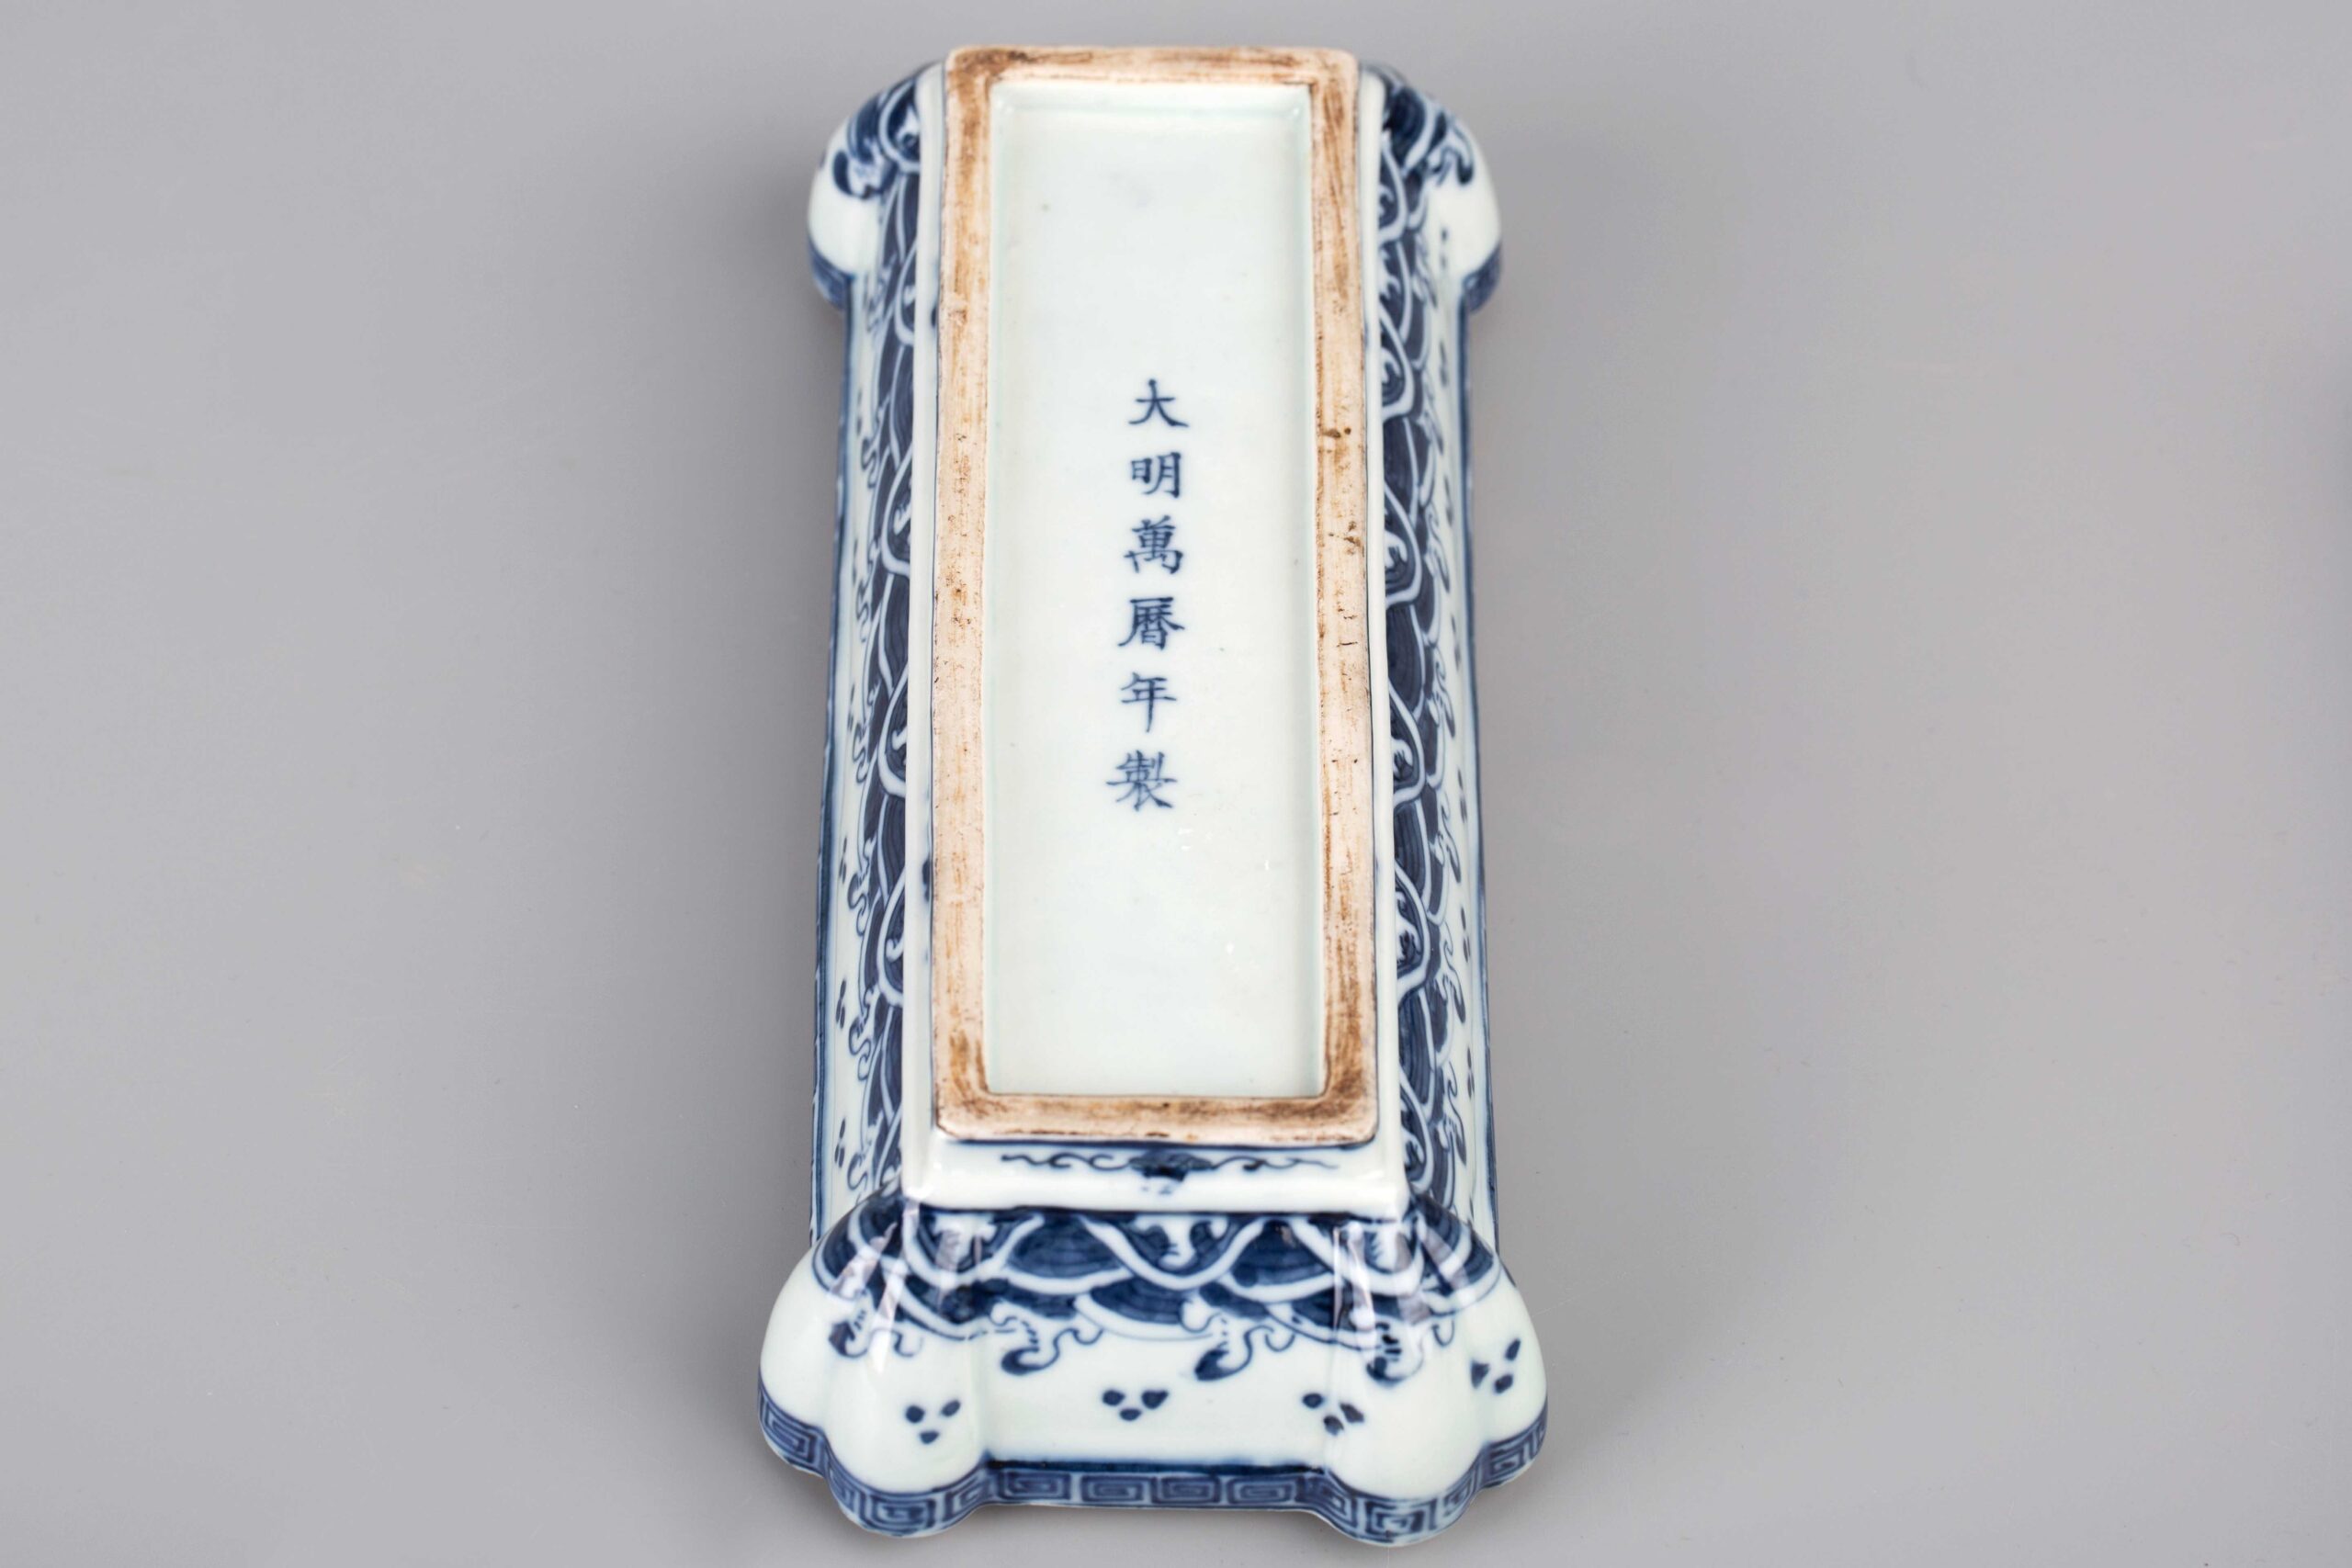 Blue and white dragon pattern lid box with Daming Wanli Year Made 